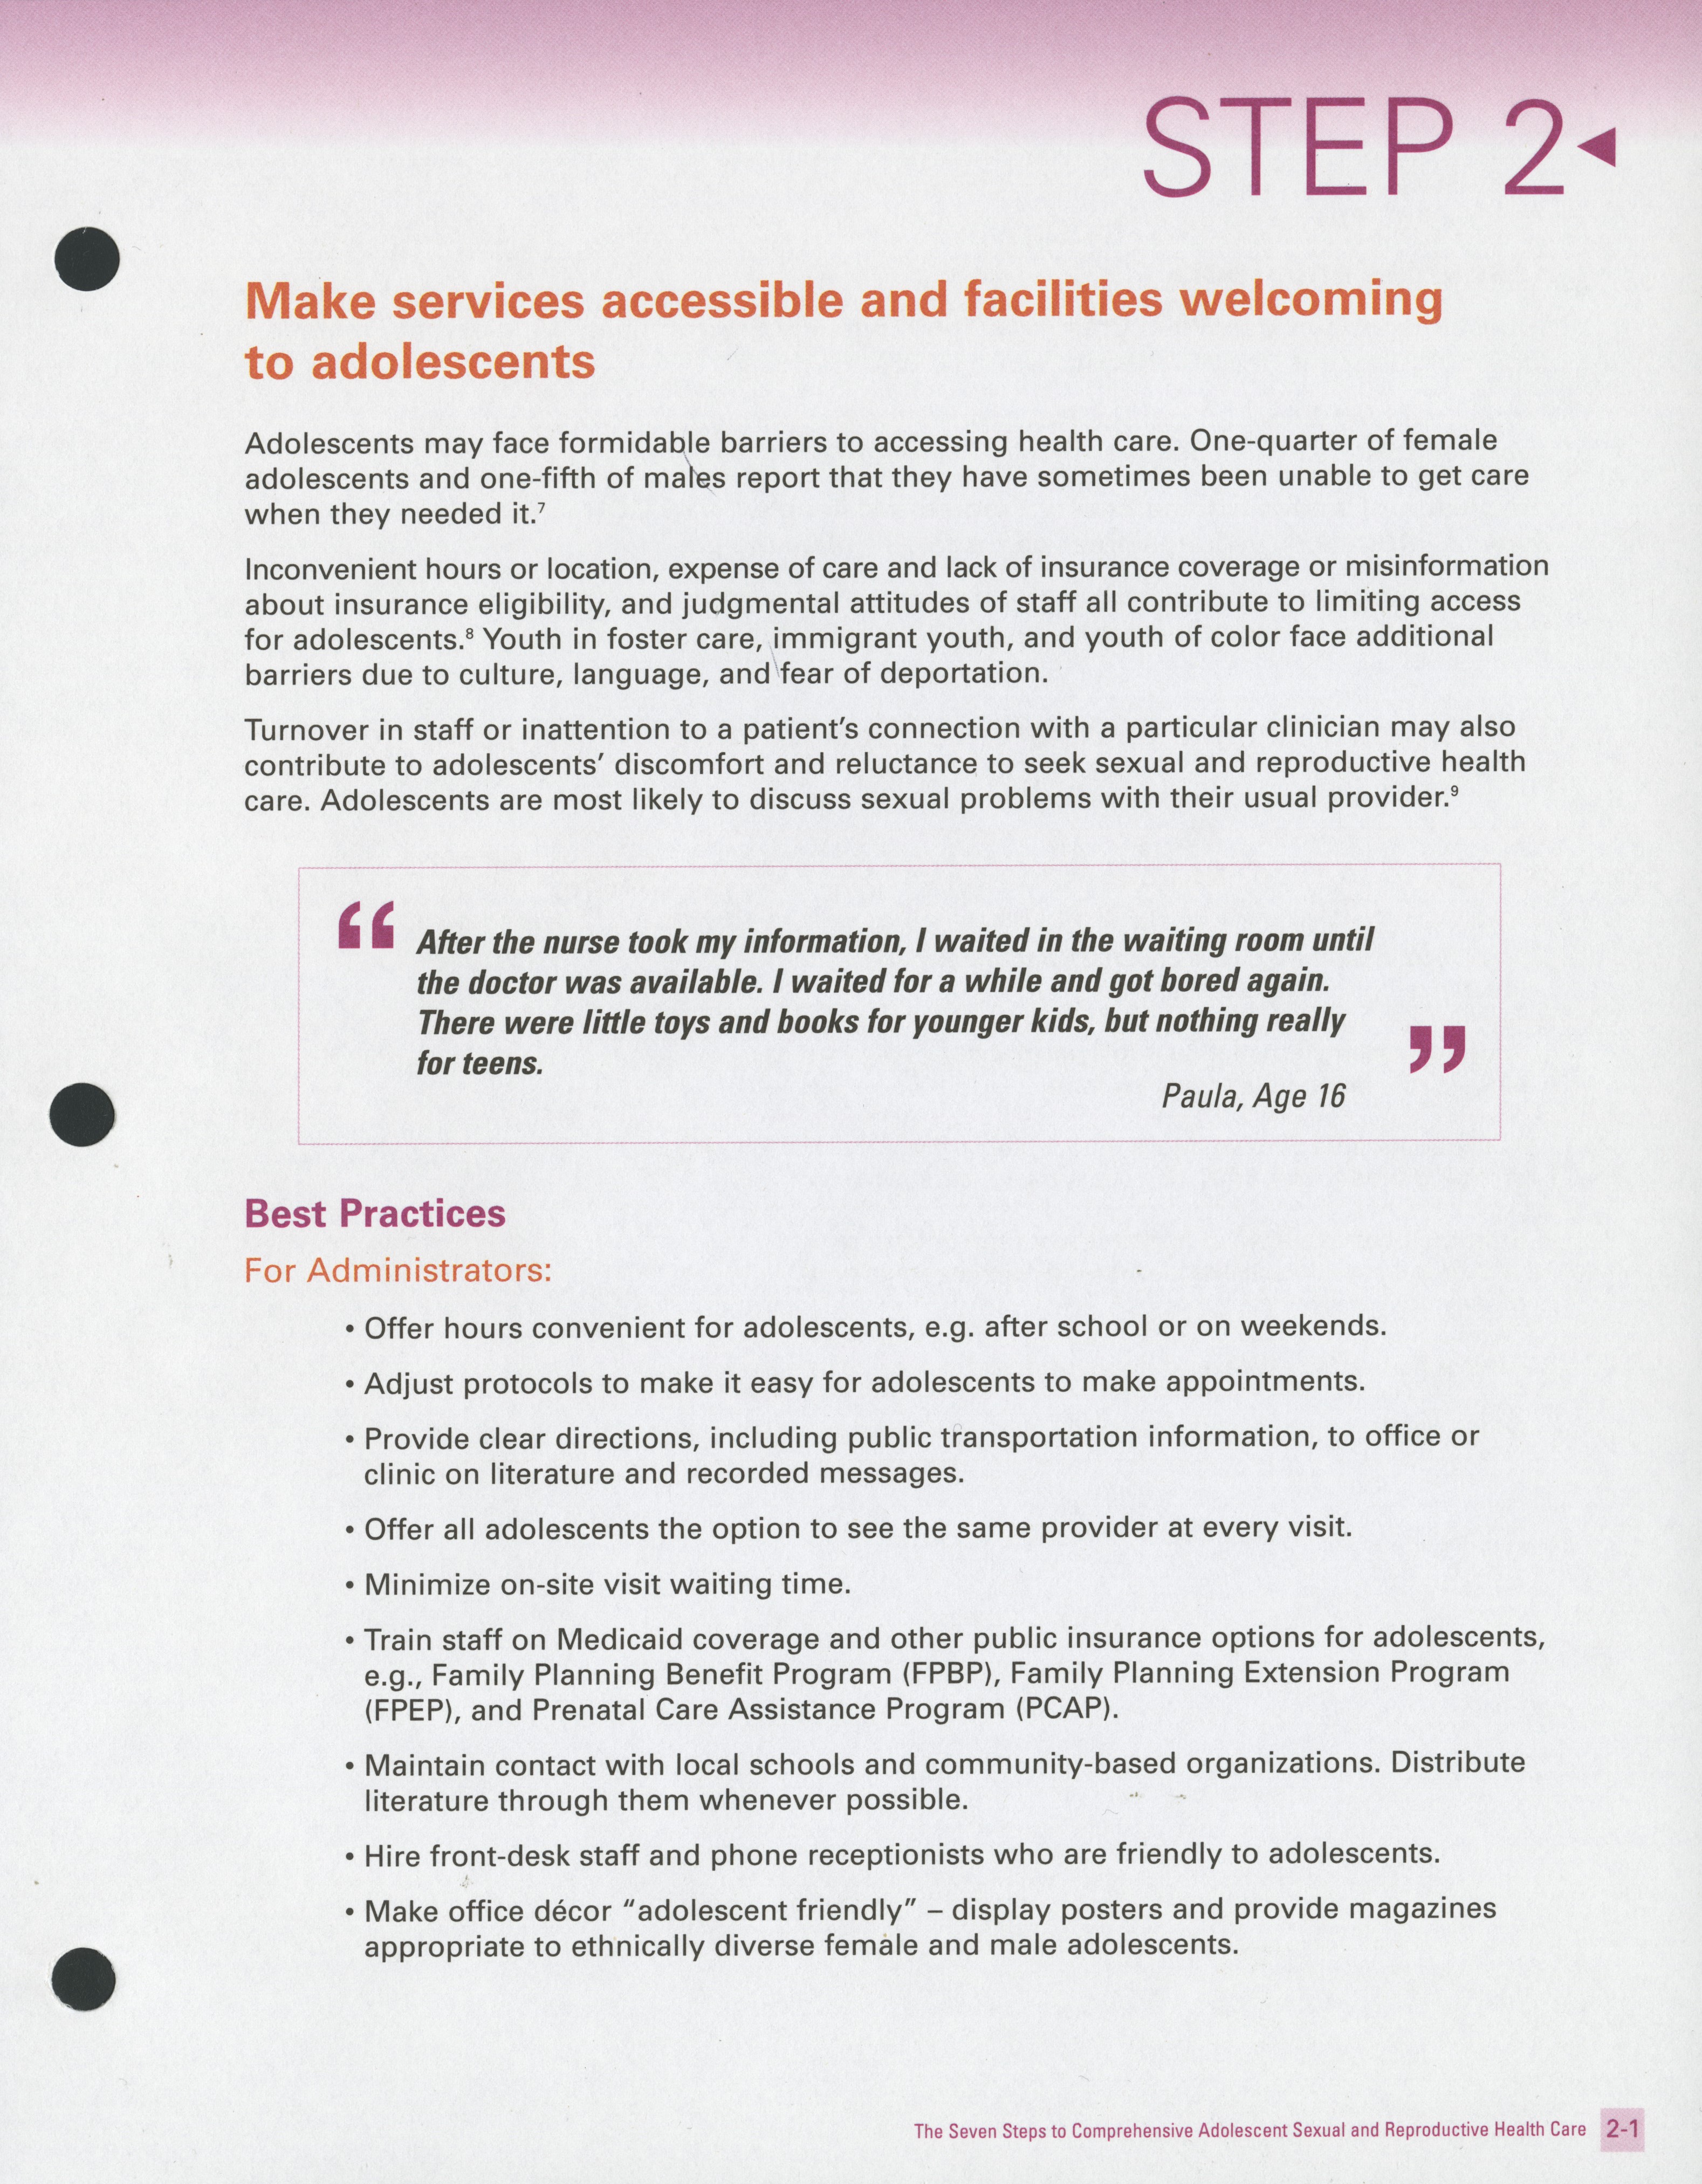 Text describing step 2 of the guidelines requiring services to adolescents be made  accessible and welcoming to adolescents.